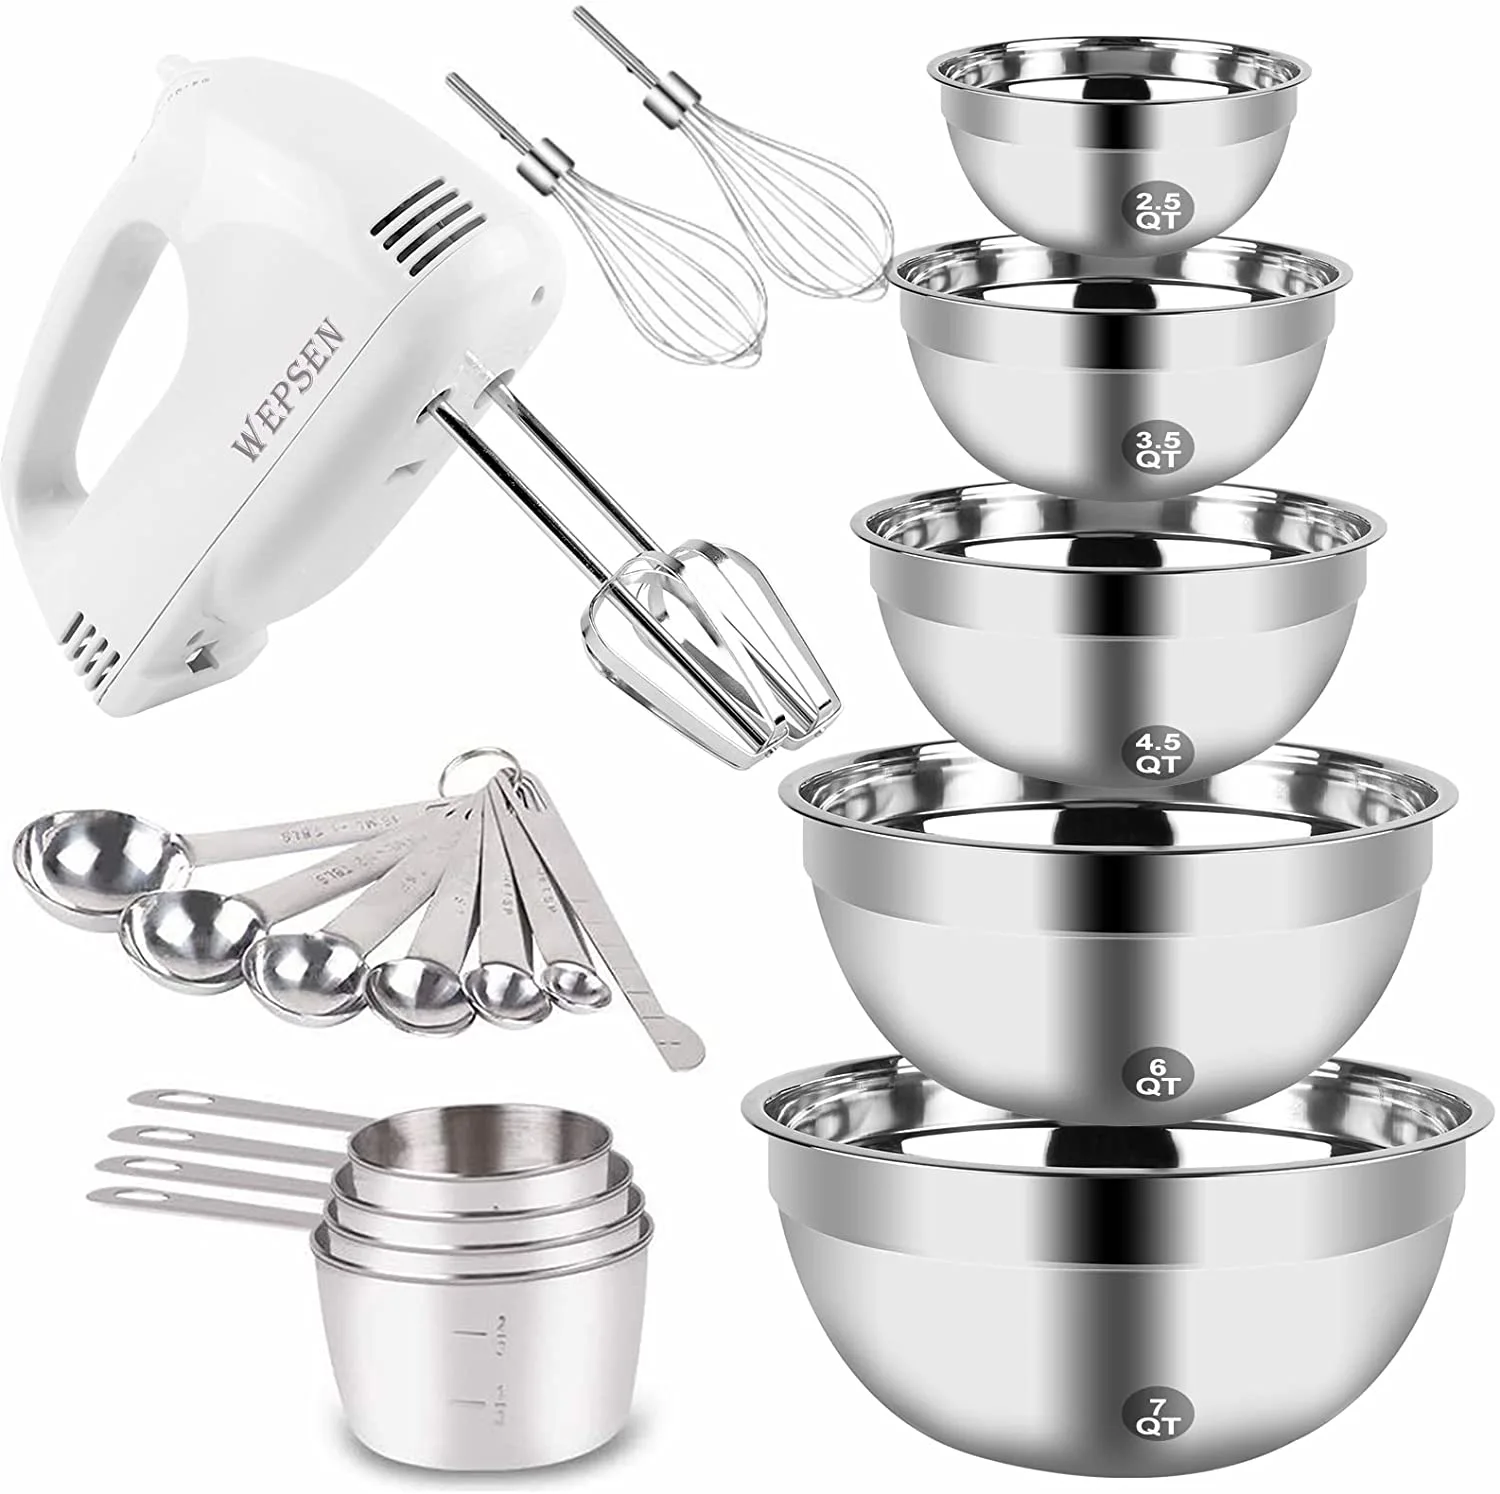 Hand Mixer Mixing Bowls Set, Upgrade 5-Speeds Handheld Mixers with 5 Nesting Stainless Steel Mixing Bowl, Measuring Cups and Spoons Whisk Blender Kitchen Cooking Baking Supplies For Beginner